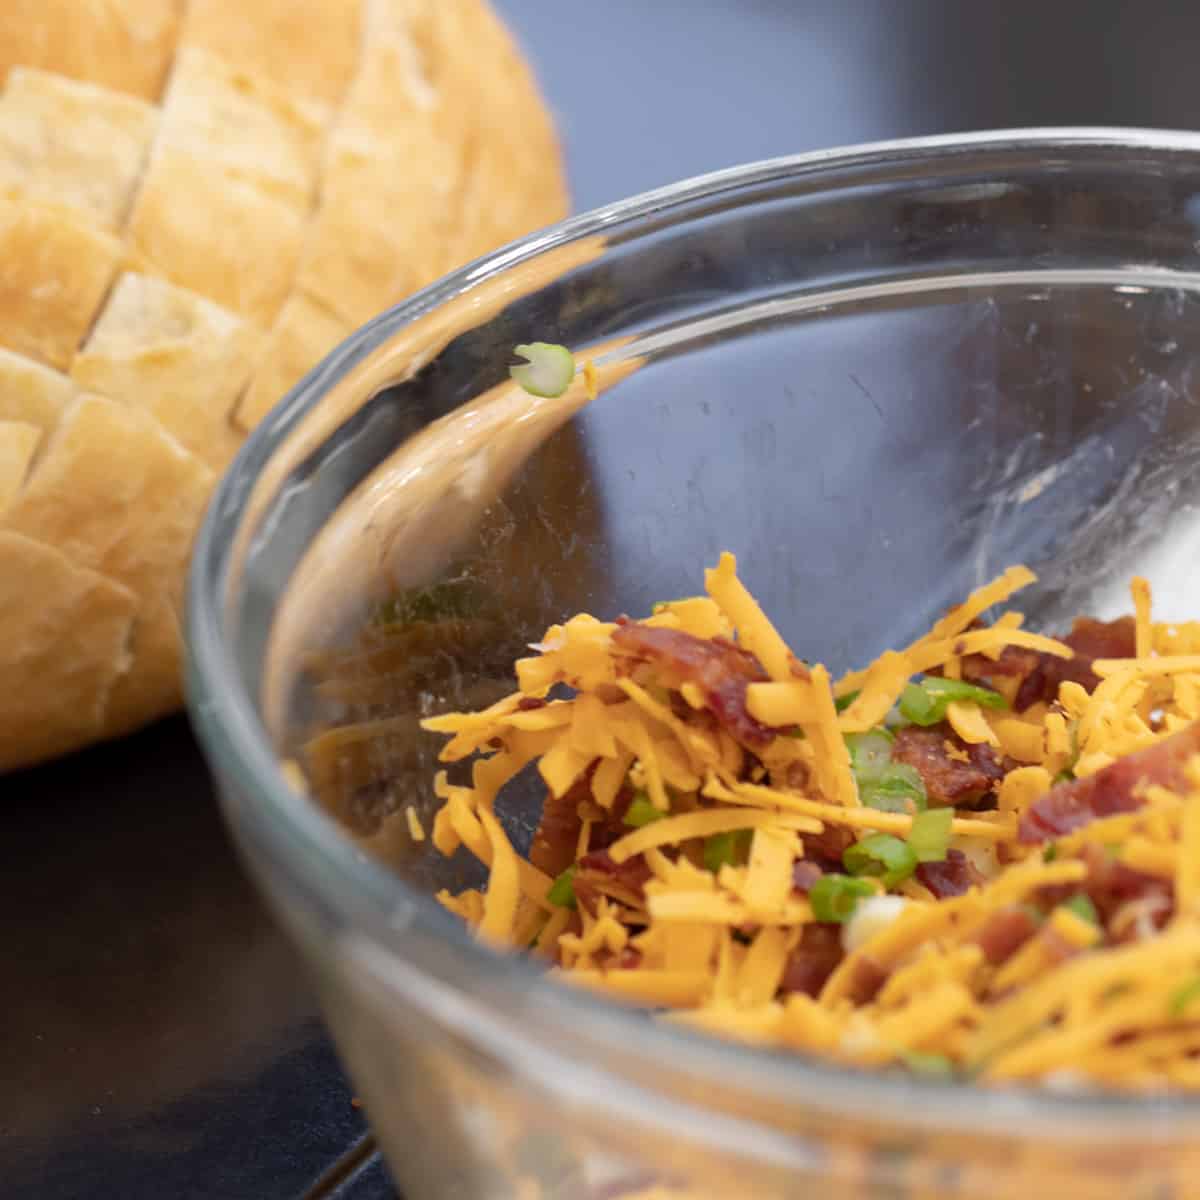 A glass mixing bowl with bacon, grated cheese and sliced green onions.